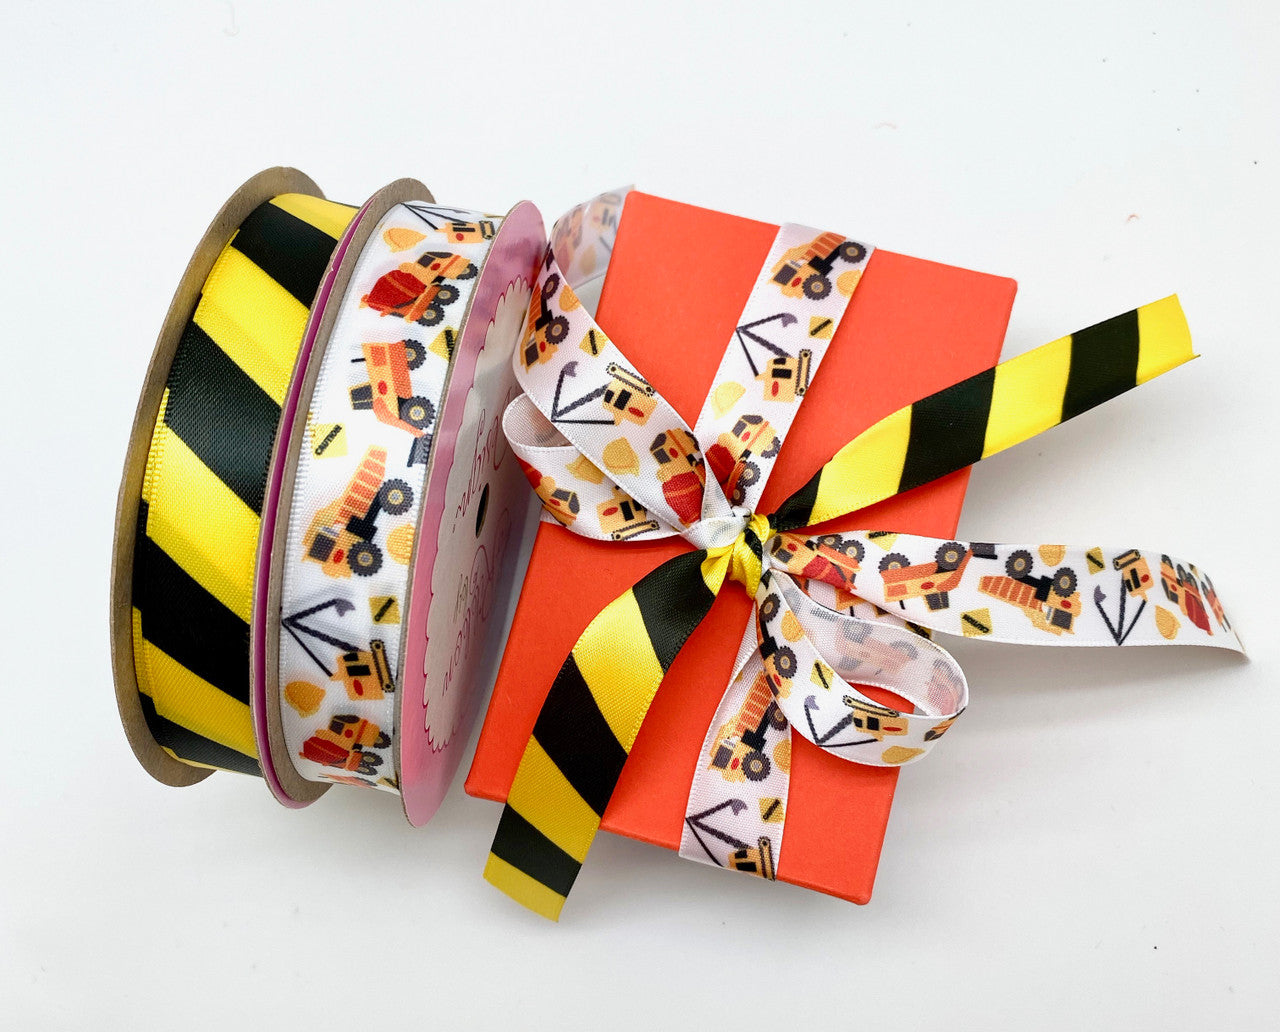 Our caution tape ribbon makes a great addition to construction vehicles! If you are having a construction themed party, be sure to add our caution tape ribbon!